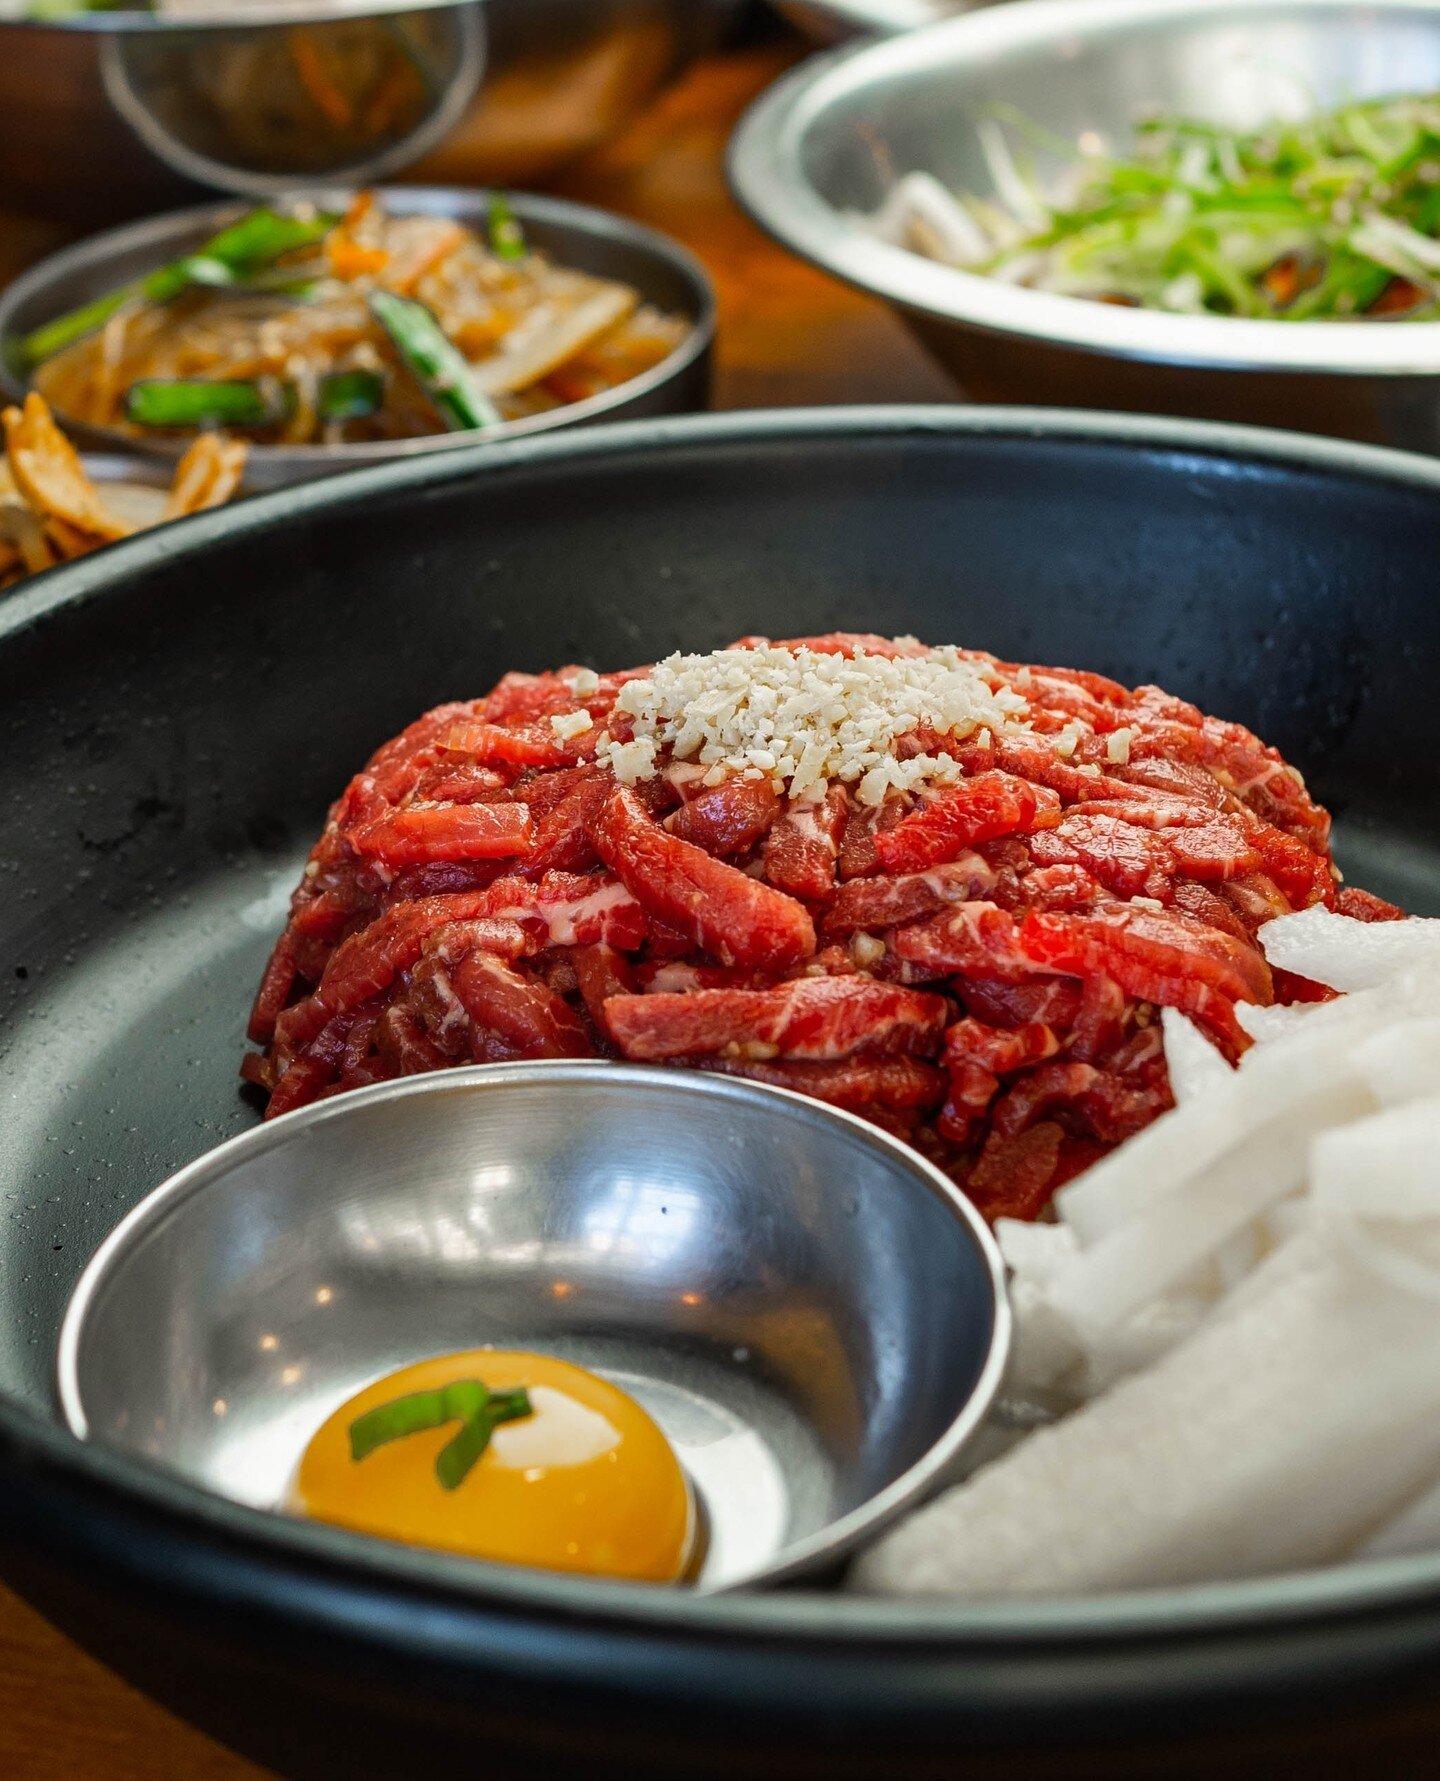 Yukke is the Korean way of eating RAW BEEF MEAT. The sweetness of the Asian Pear and the creaminess of the Egg Yolk make a perfect pair to the raw beef. ⁠
@songhakbbq⁠
📍K-Town⁠
📍Cerritos⁠
📍Tustin⁠
📍San Diego⁠
.⁠
.⁠
#foodie #foodiereels #ayce #los